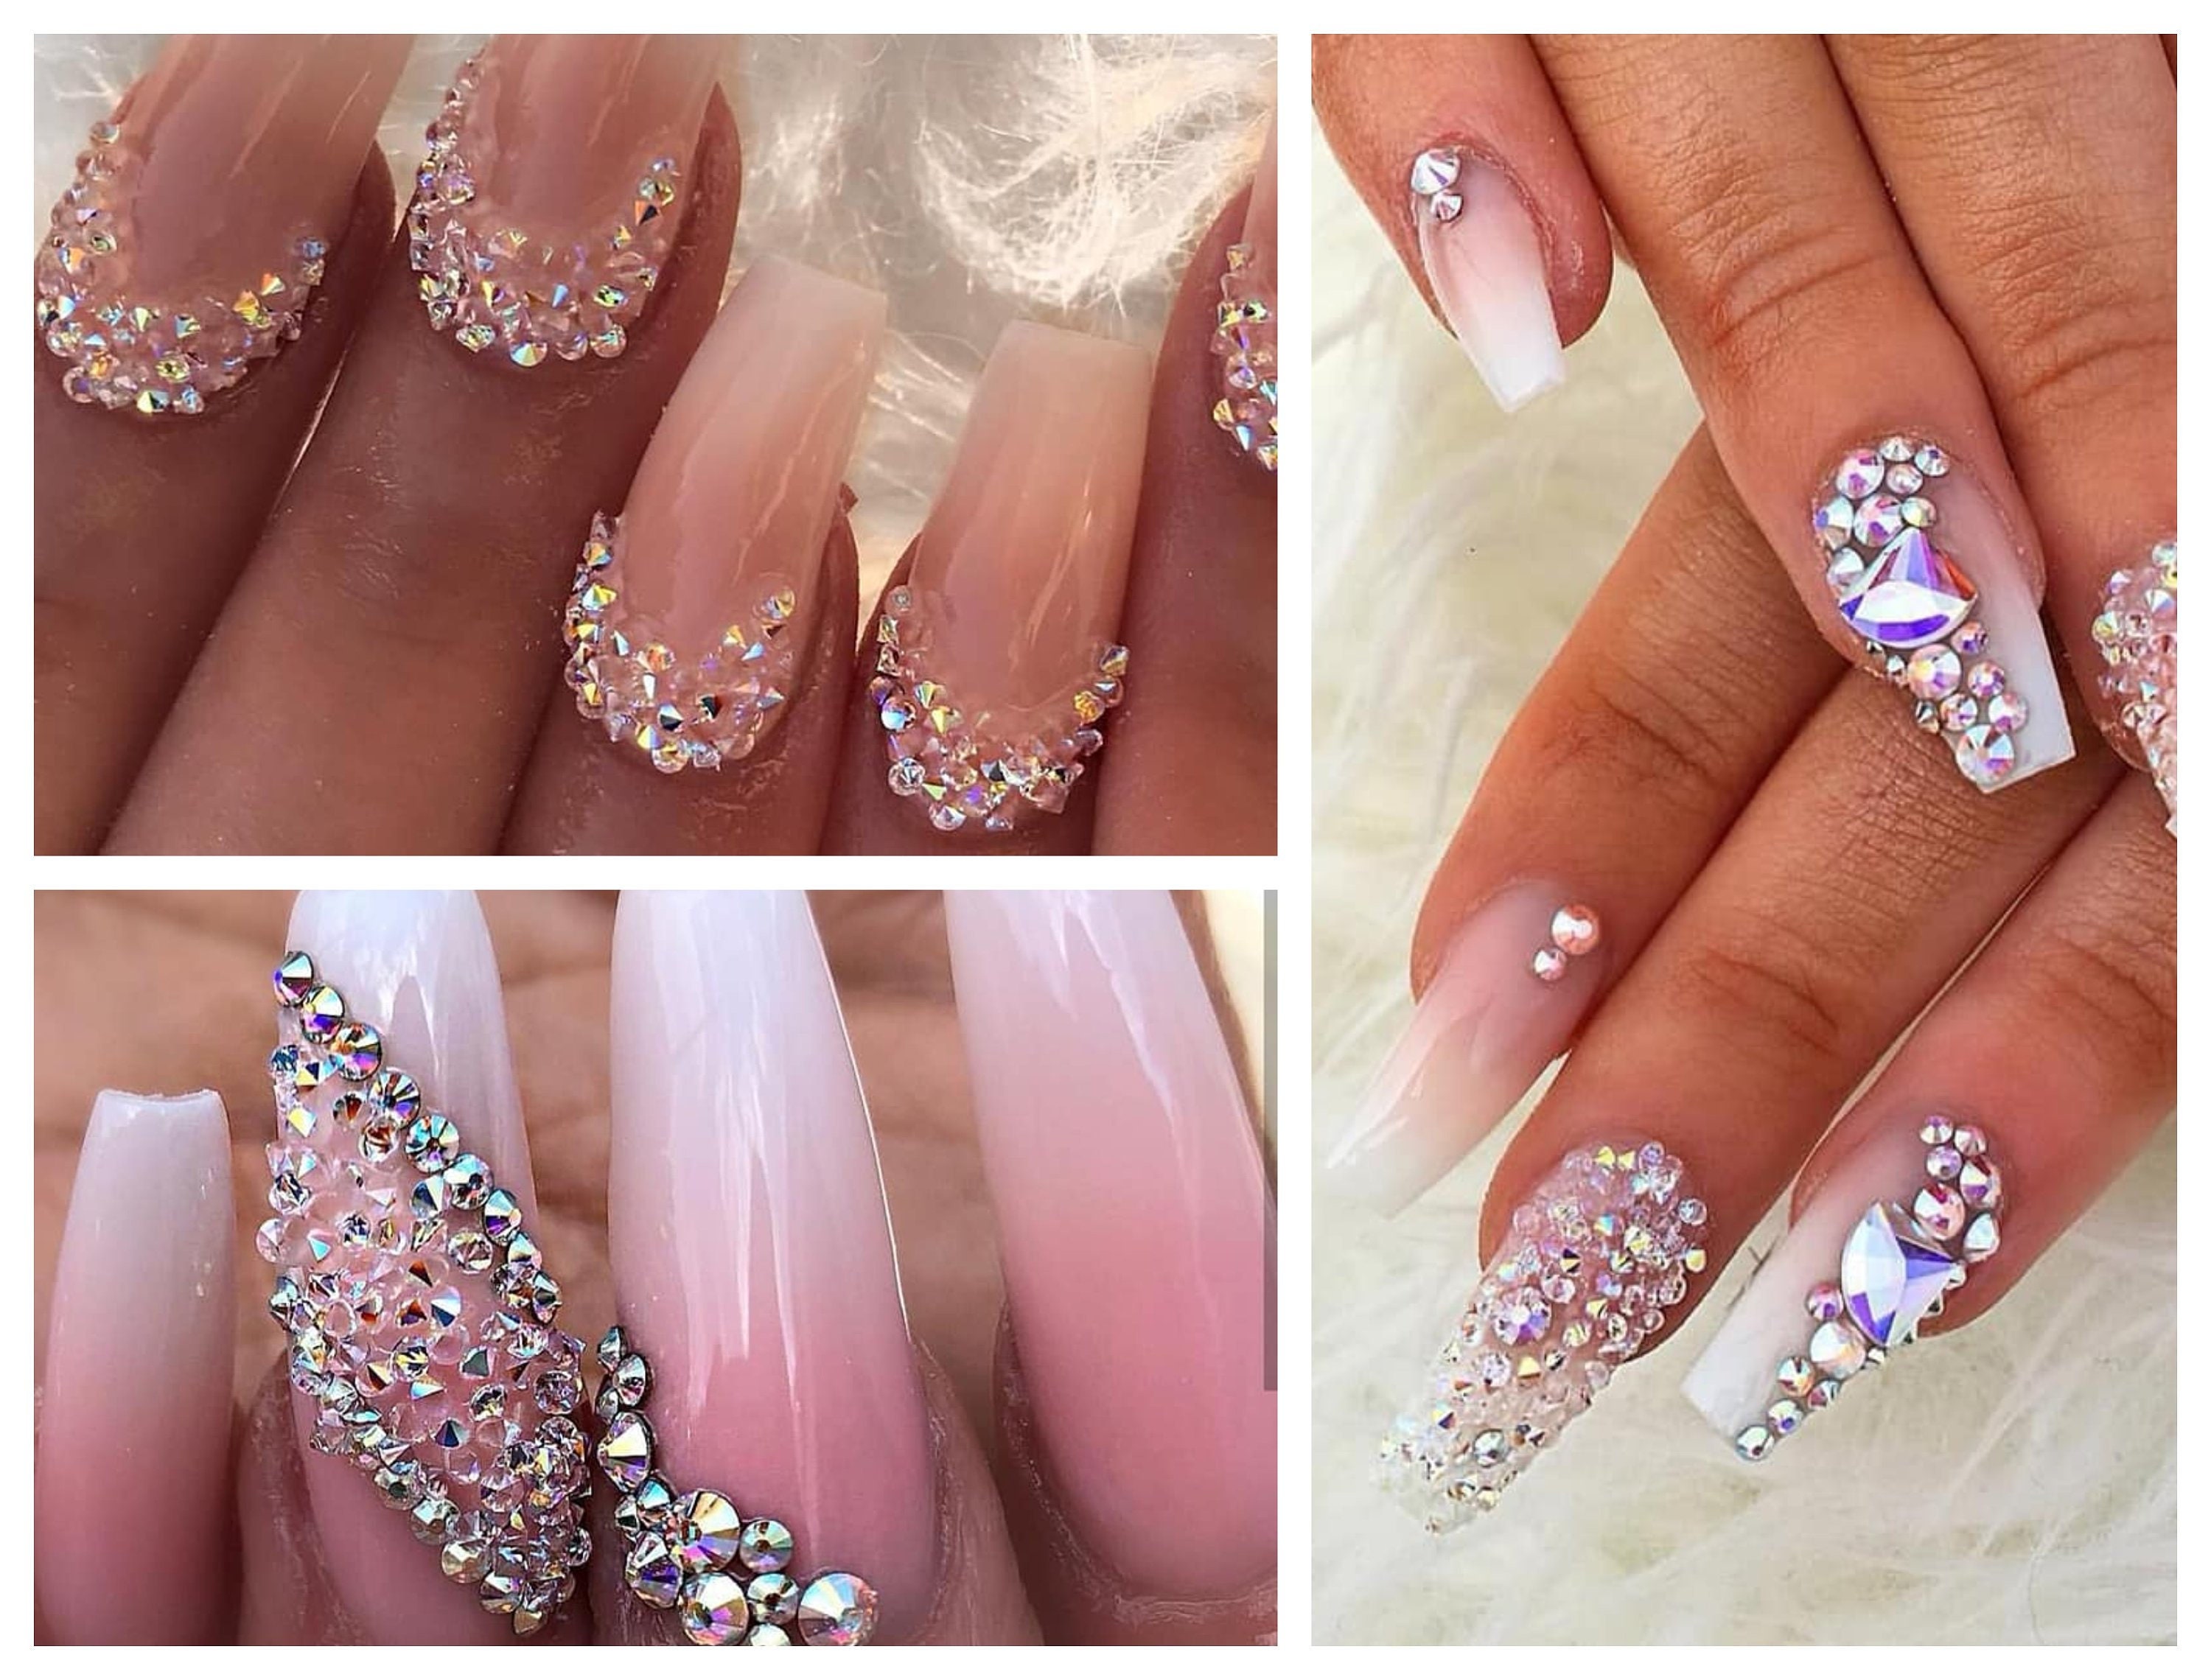 7. Nail Art with Swarovski Crystals - wide 6